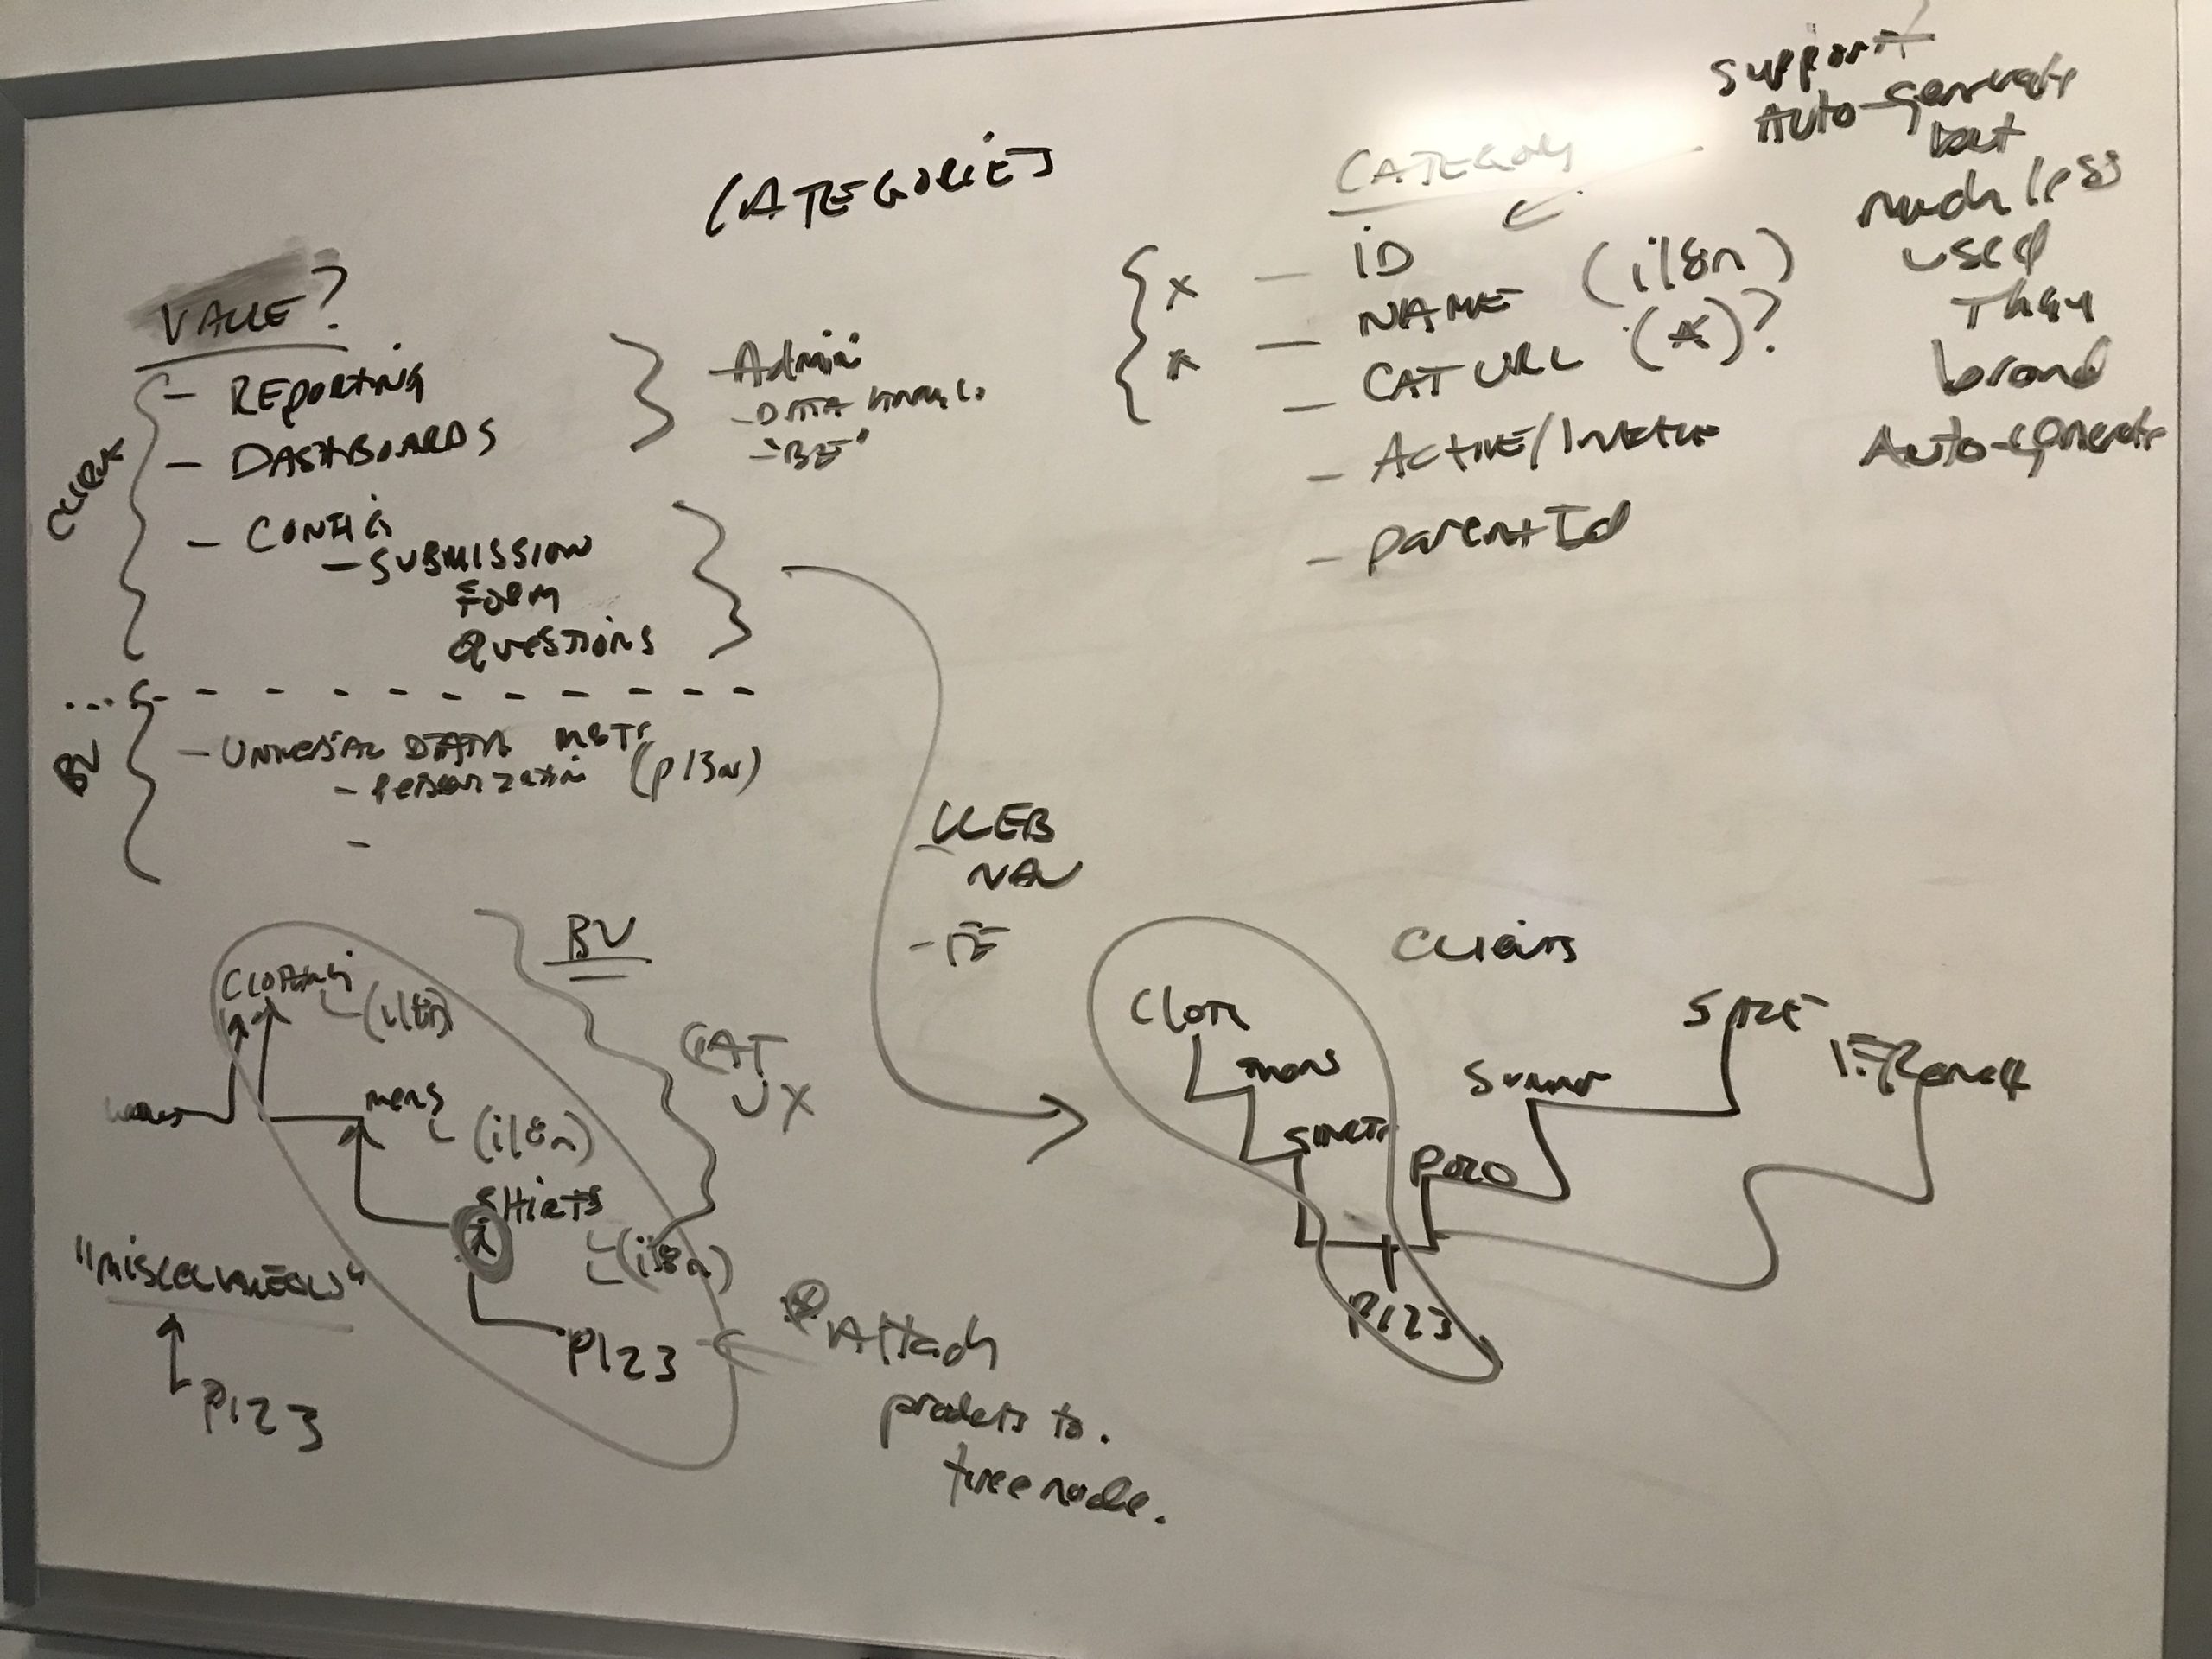 An example of a whiteboard during a collaborative design session